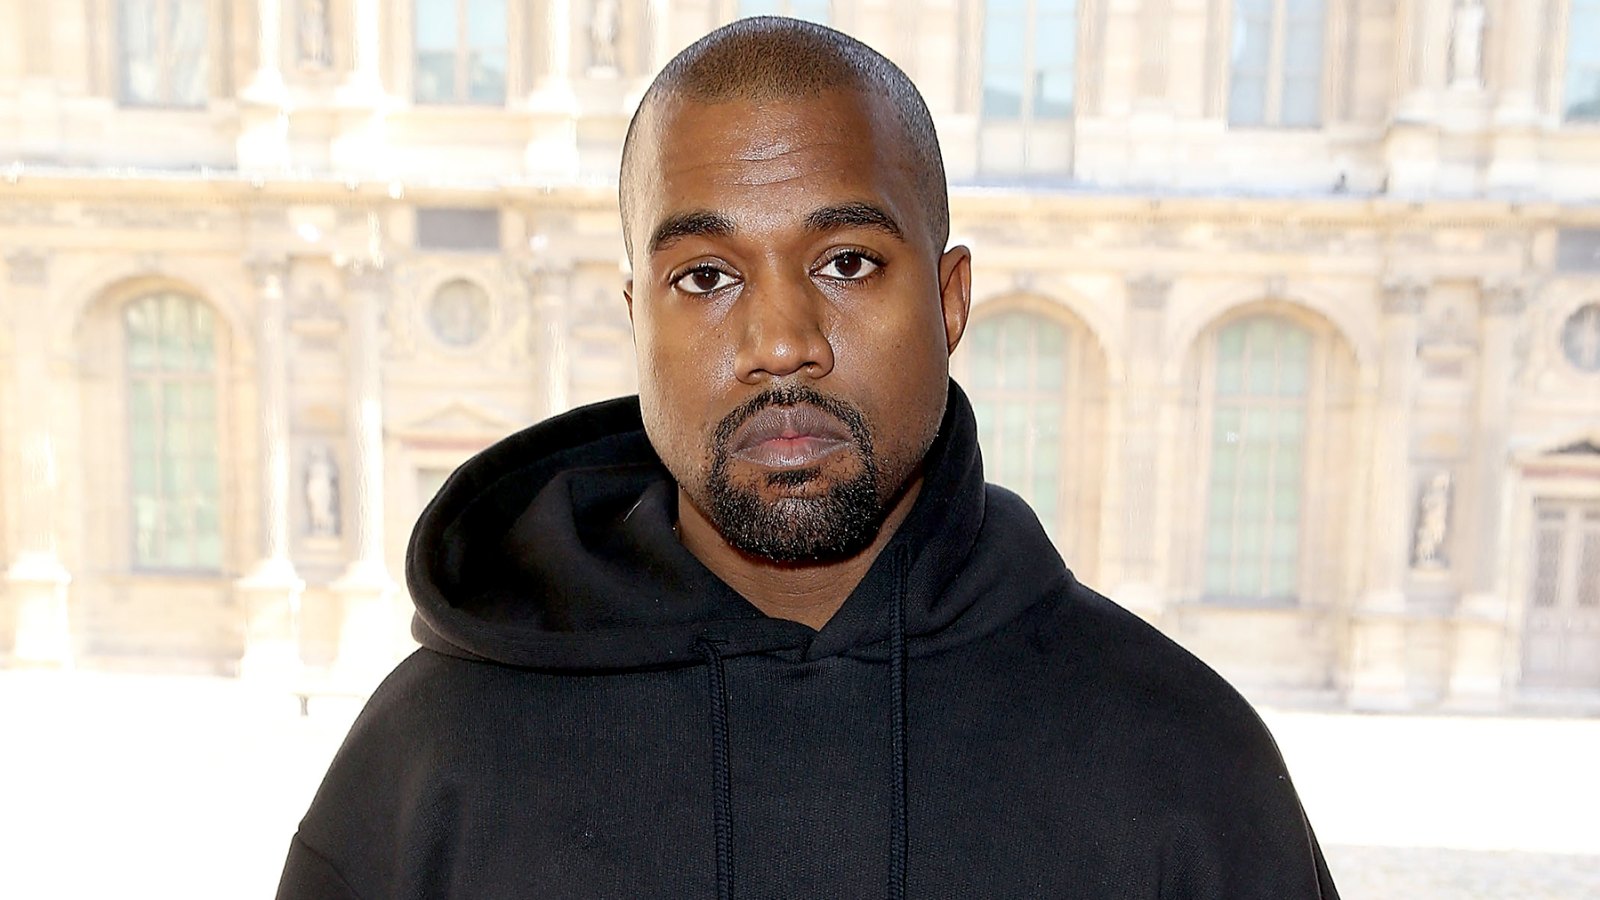 Kanye West attends the Christian Dior show as part of the Paris Fashion Week Womenswear Fall/Winter 2015/2016 at Cour Carree du Louvre on March 6, 2015 in Paris, France.